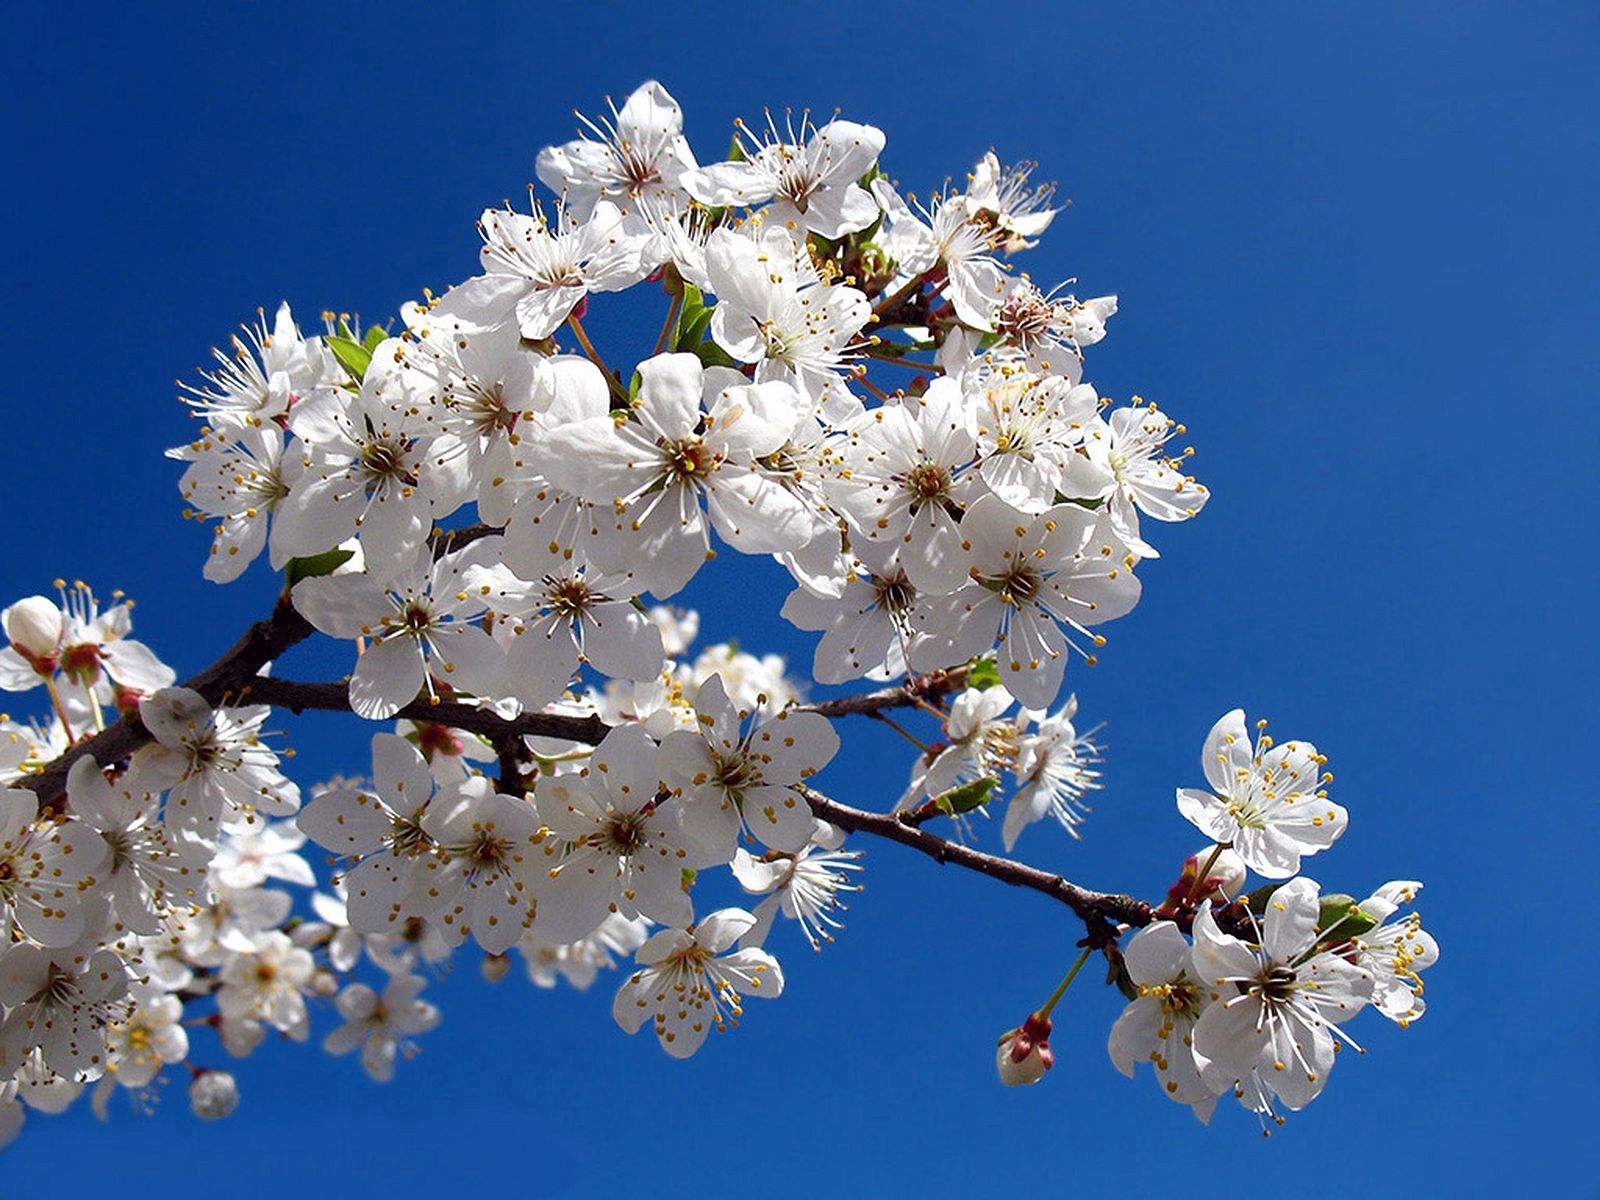 114251 3840x2160 PC pictures for free, download clear, bloom, branch, flowering 3840x2160 wallpapers on your desktop